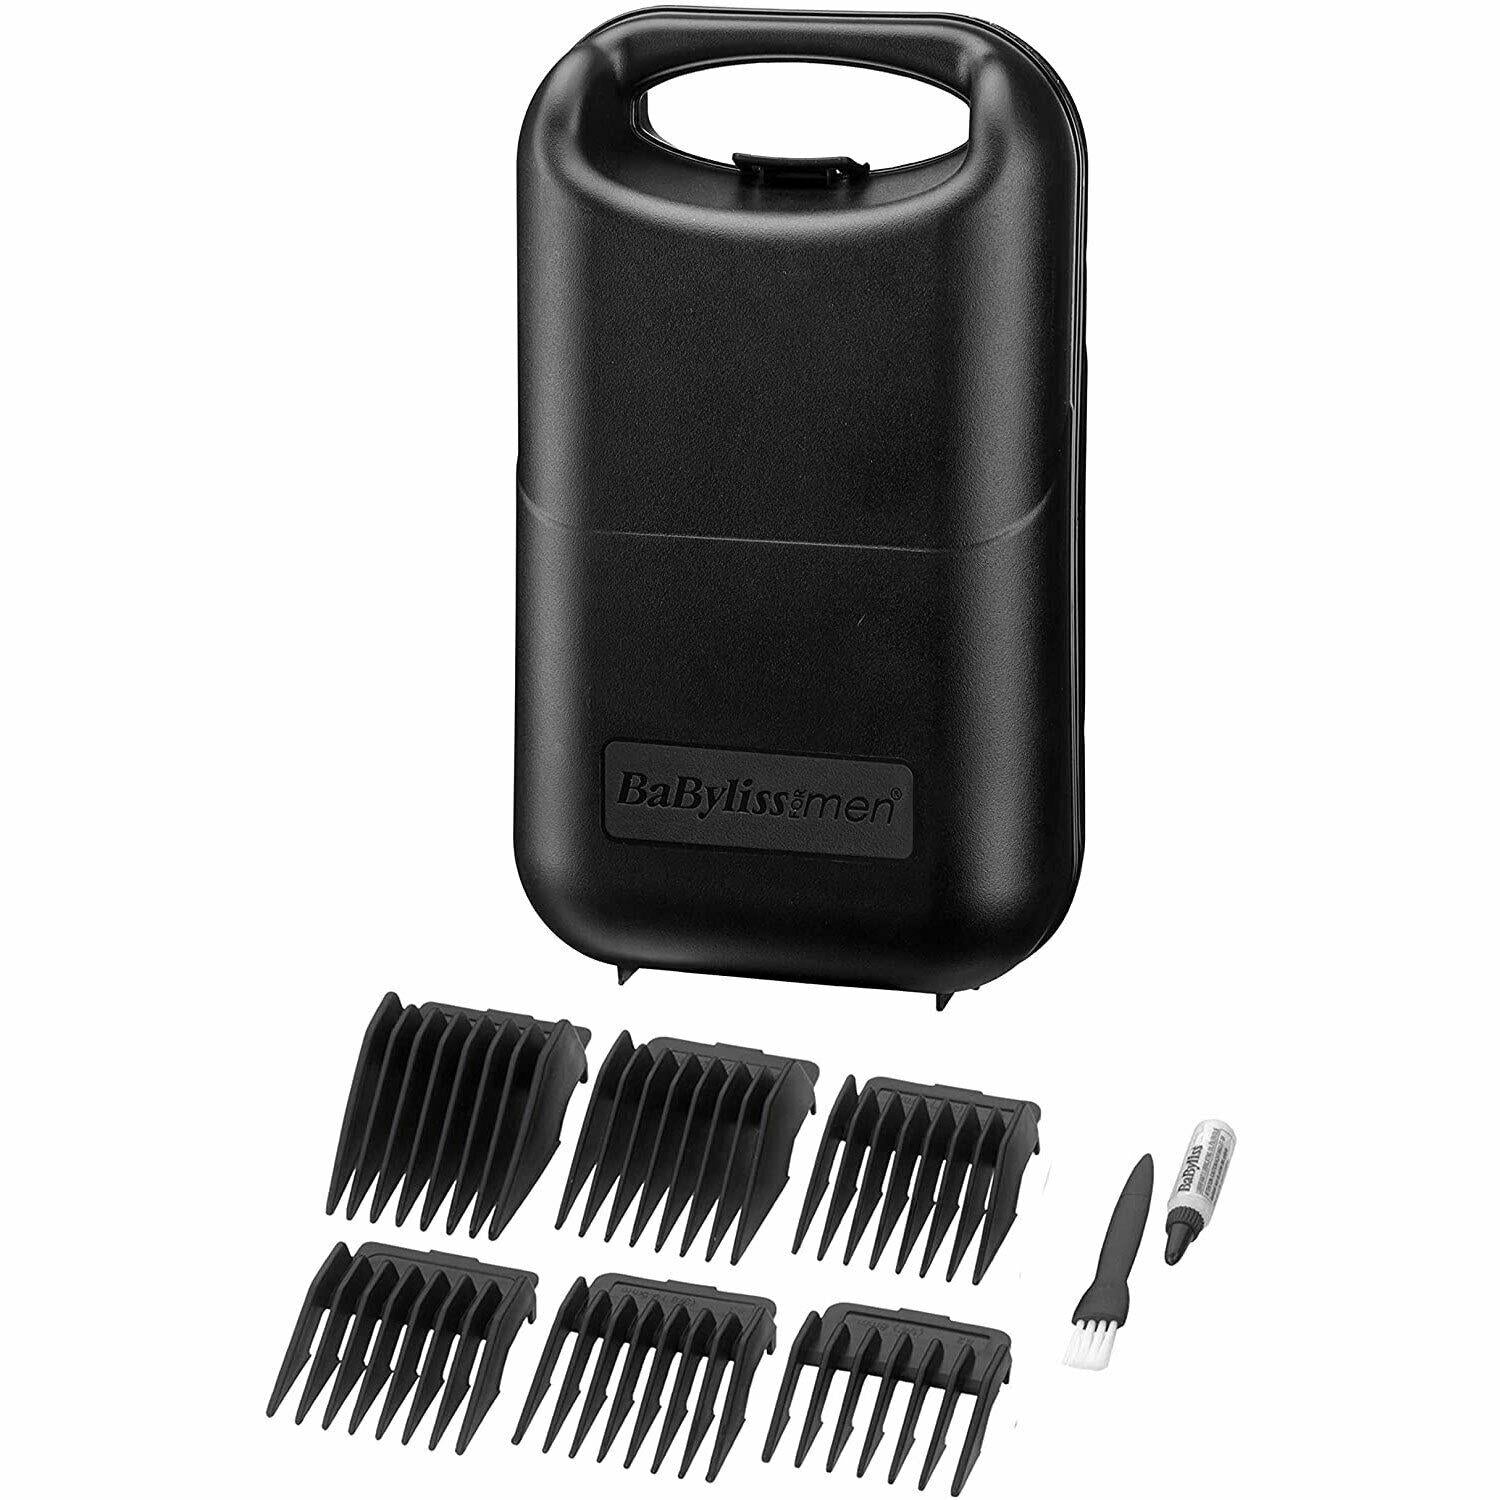 Babyliss Hair Clippers Corded Clippers Pro Hair Cutting Styling Head Shaver - 7456U